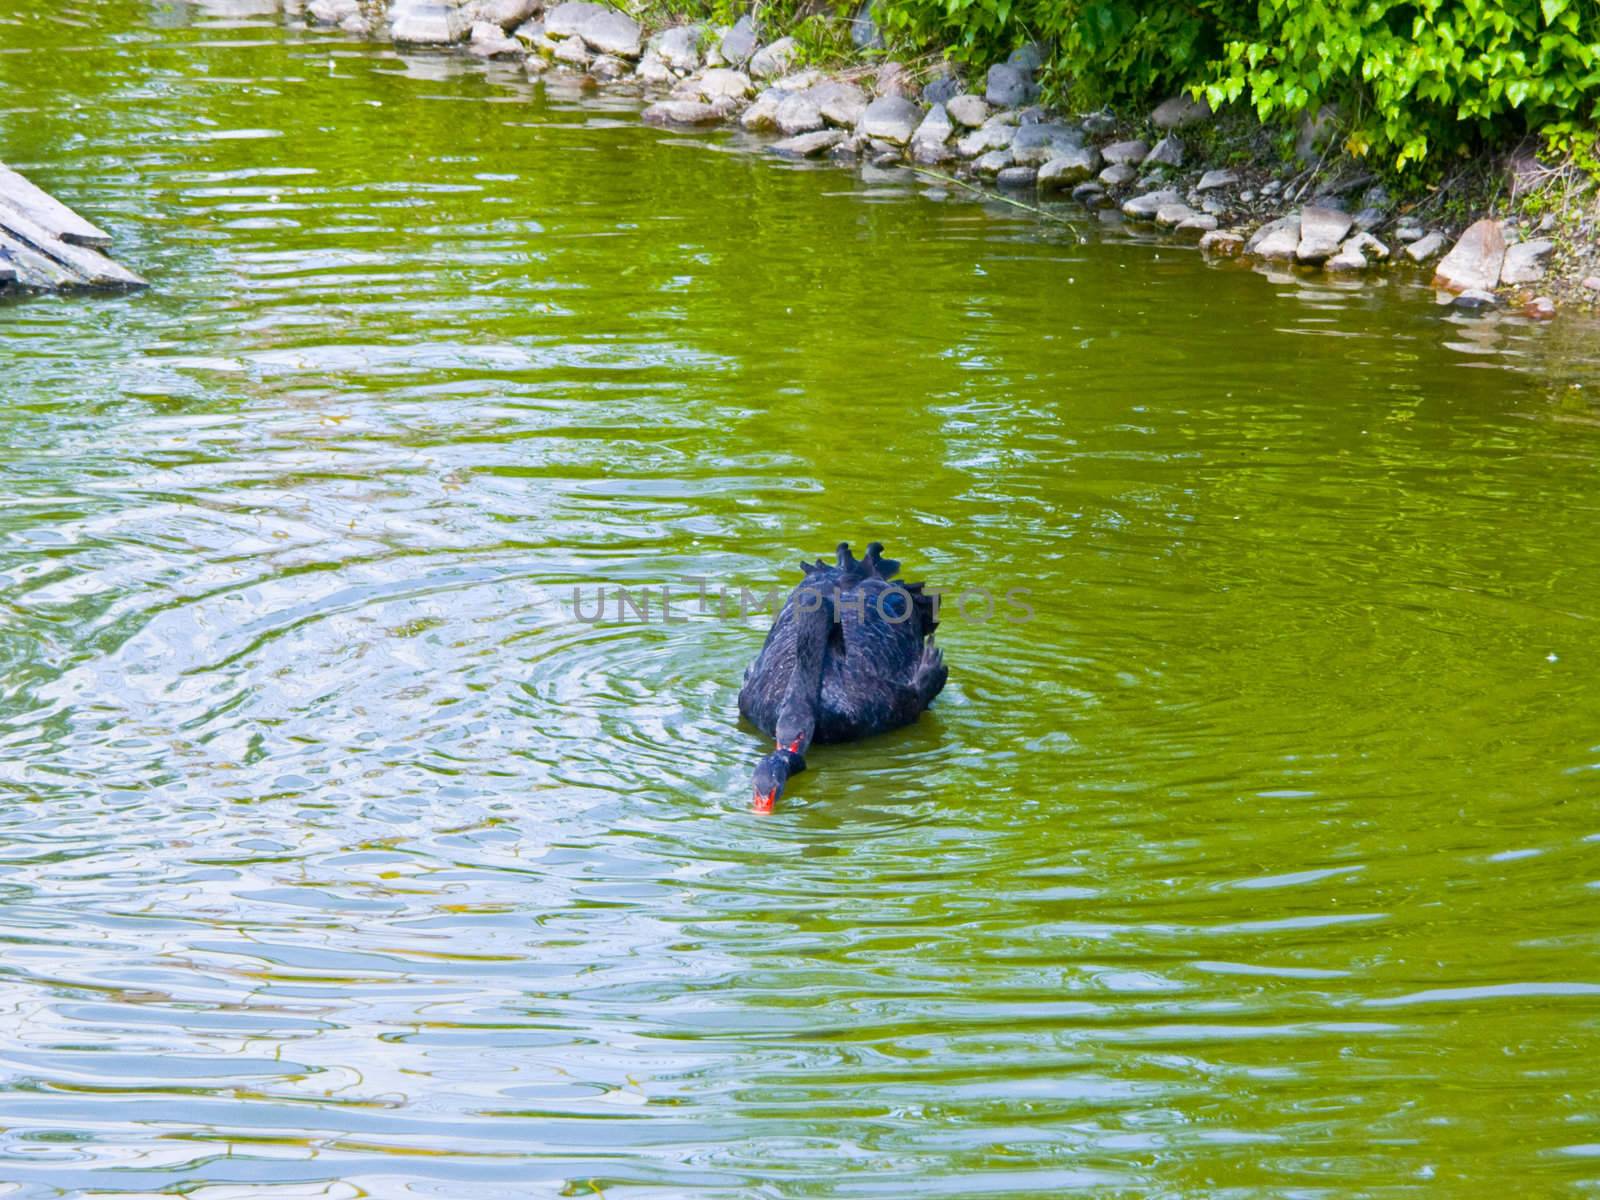 The image of the black swans floating in a pond